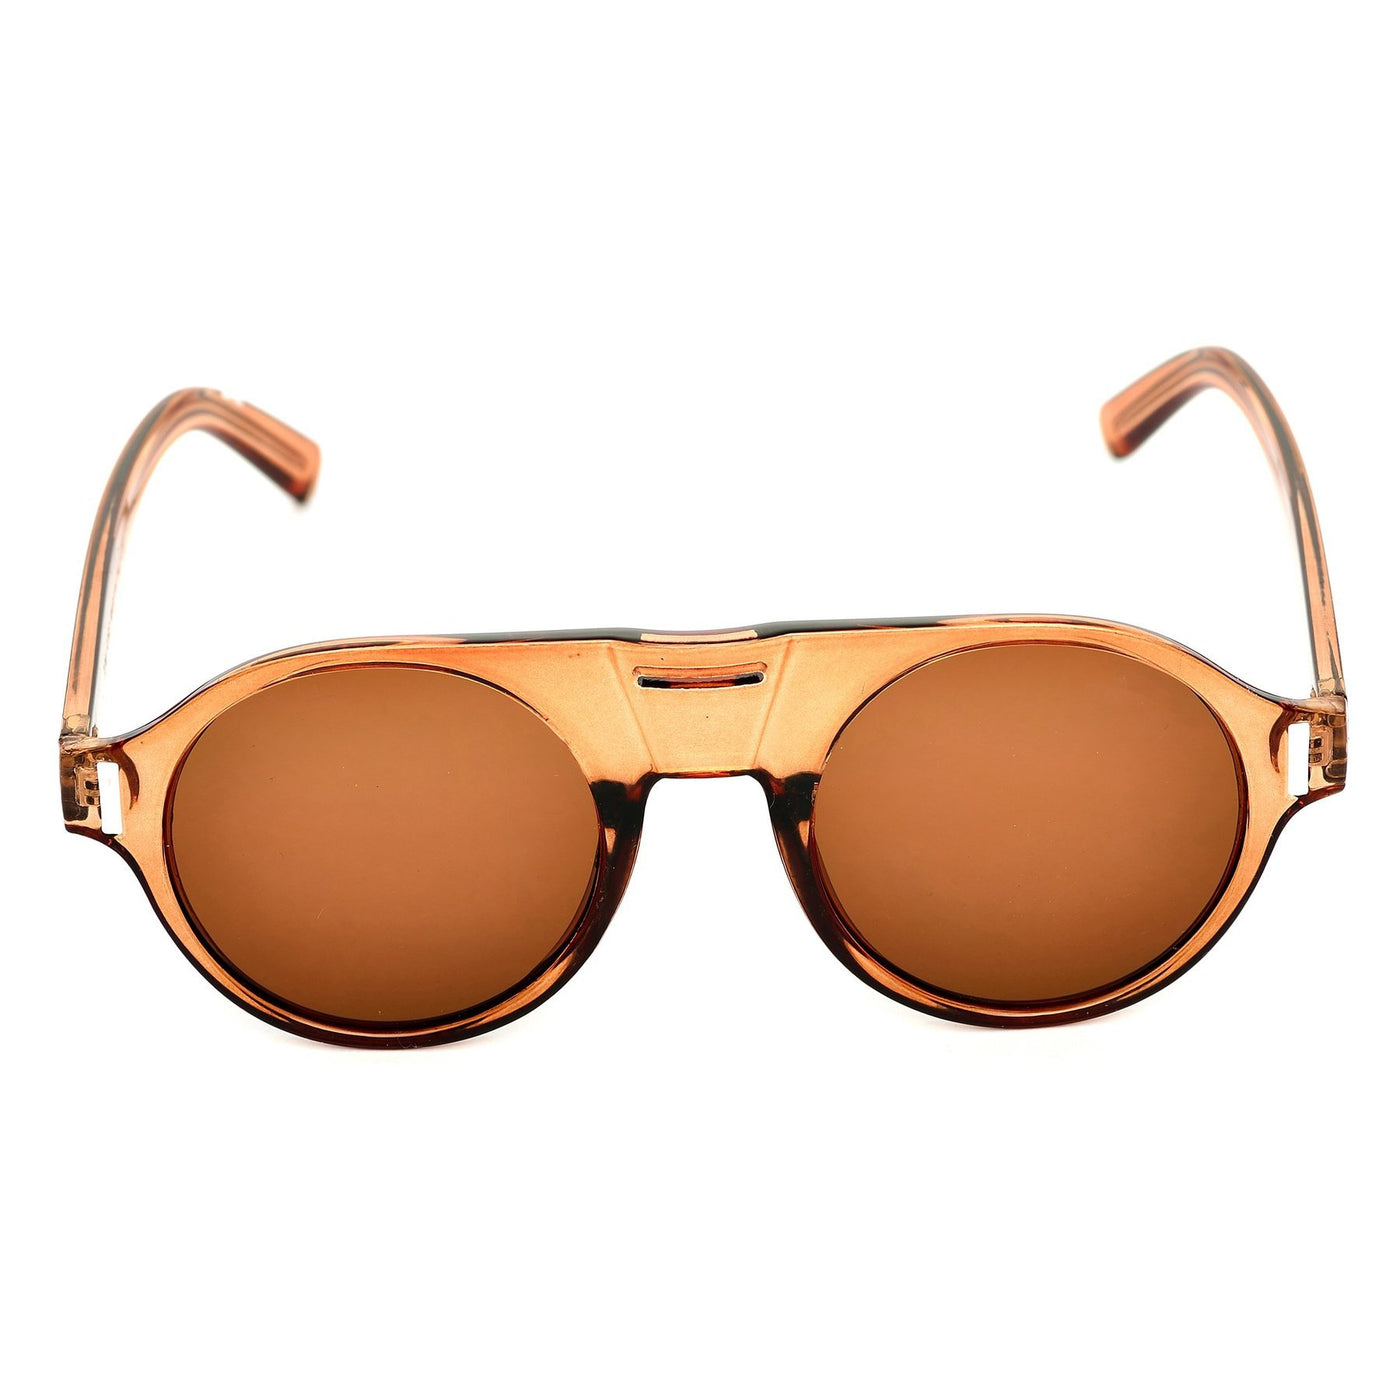 Round Brown And Coper Gold Sunglasses For Men And Women-Unique and Classy